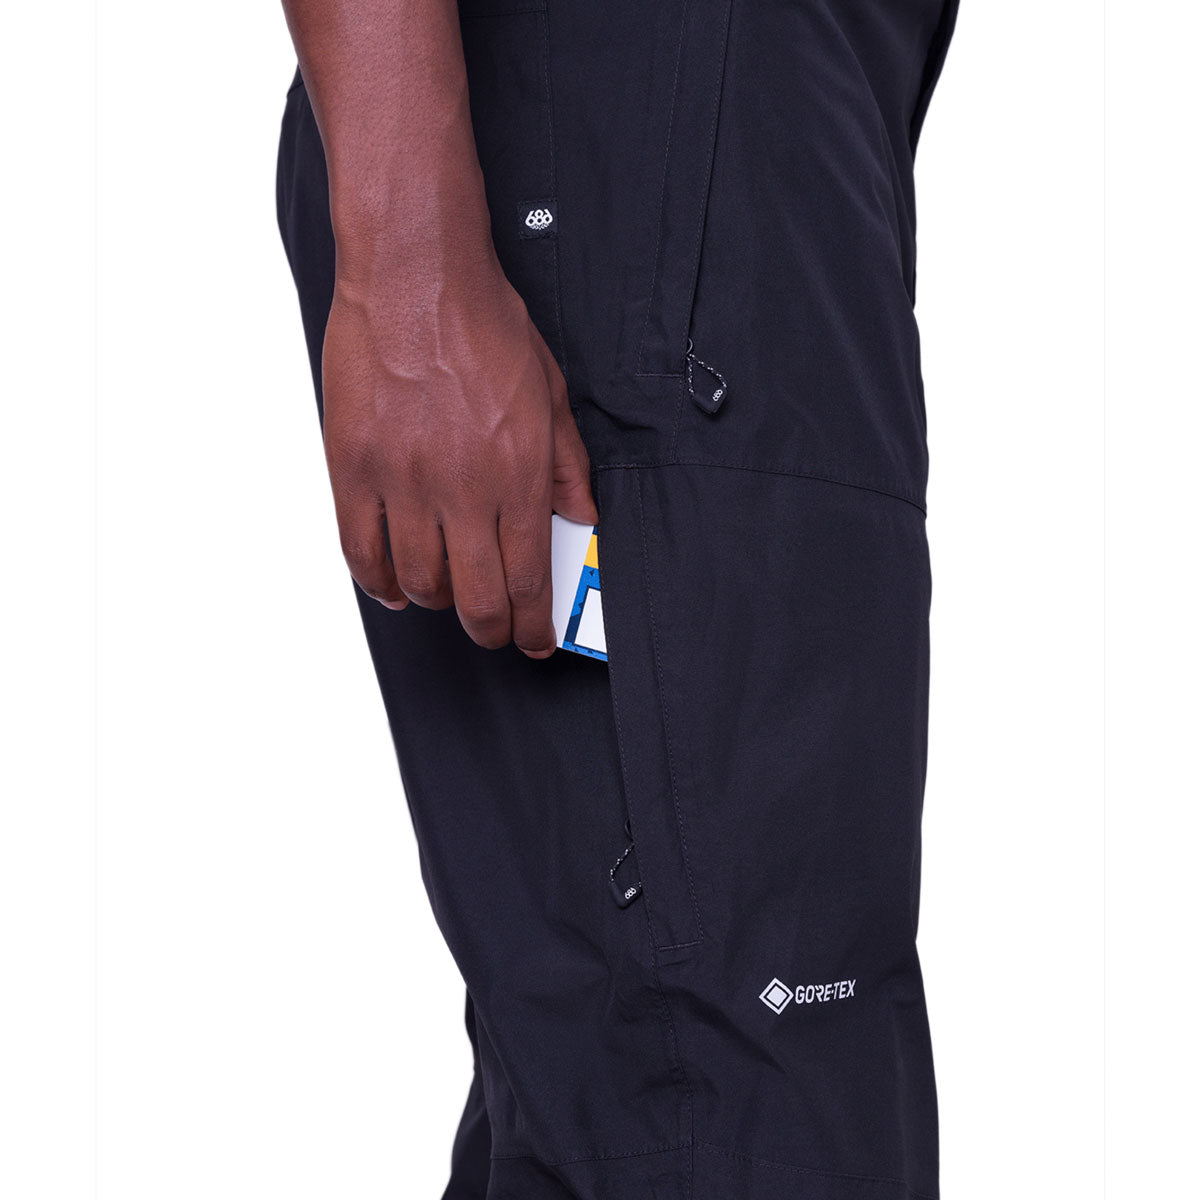 686 Gore-Tex Core Insulated Snowboard Pants - Black image 3